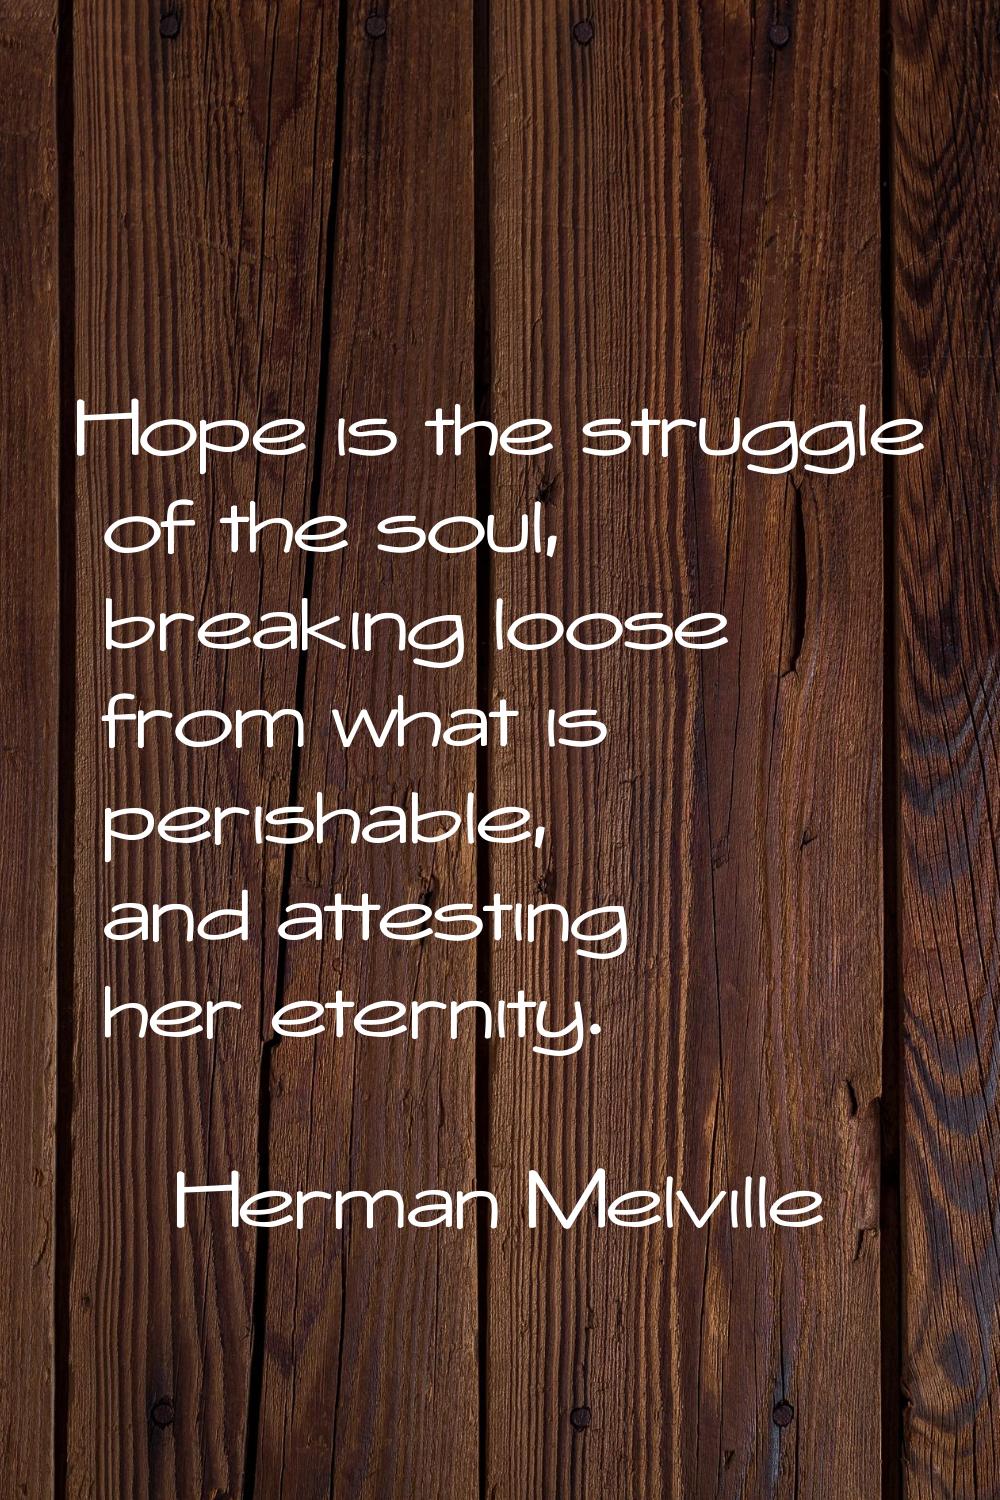 Hope is the struggle of the soul, breaking loose from what is perishable, and attesting her eternit